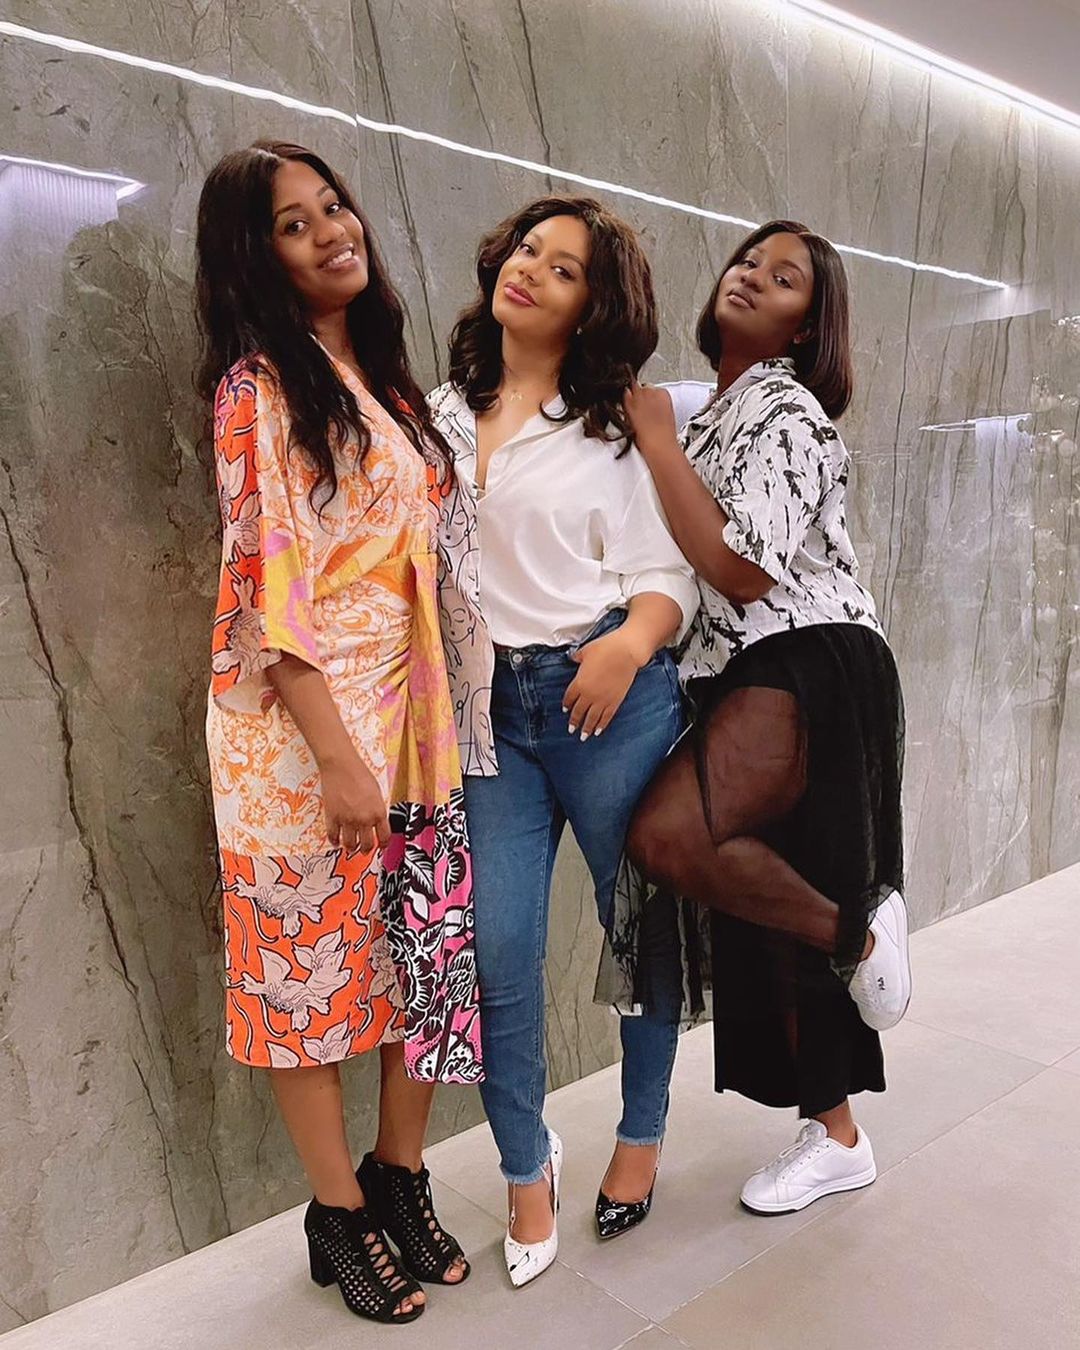 New photos of Nadia Buari and her two beautiful rich sisters surfaces